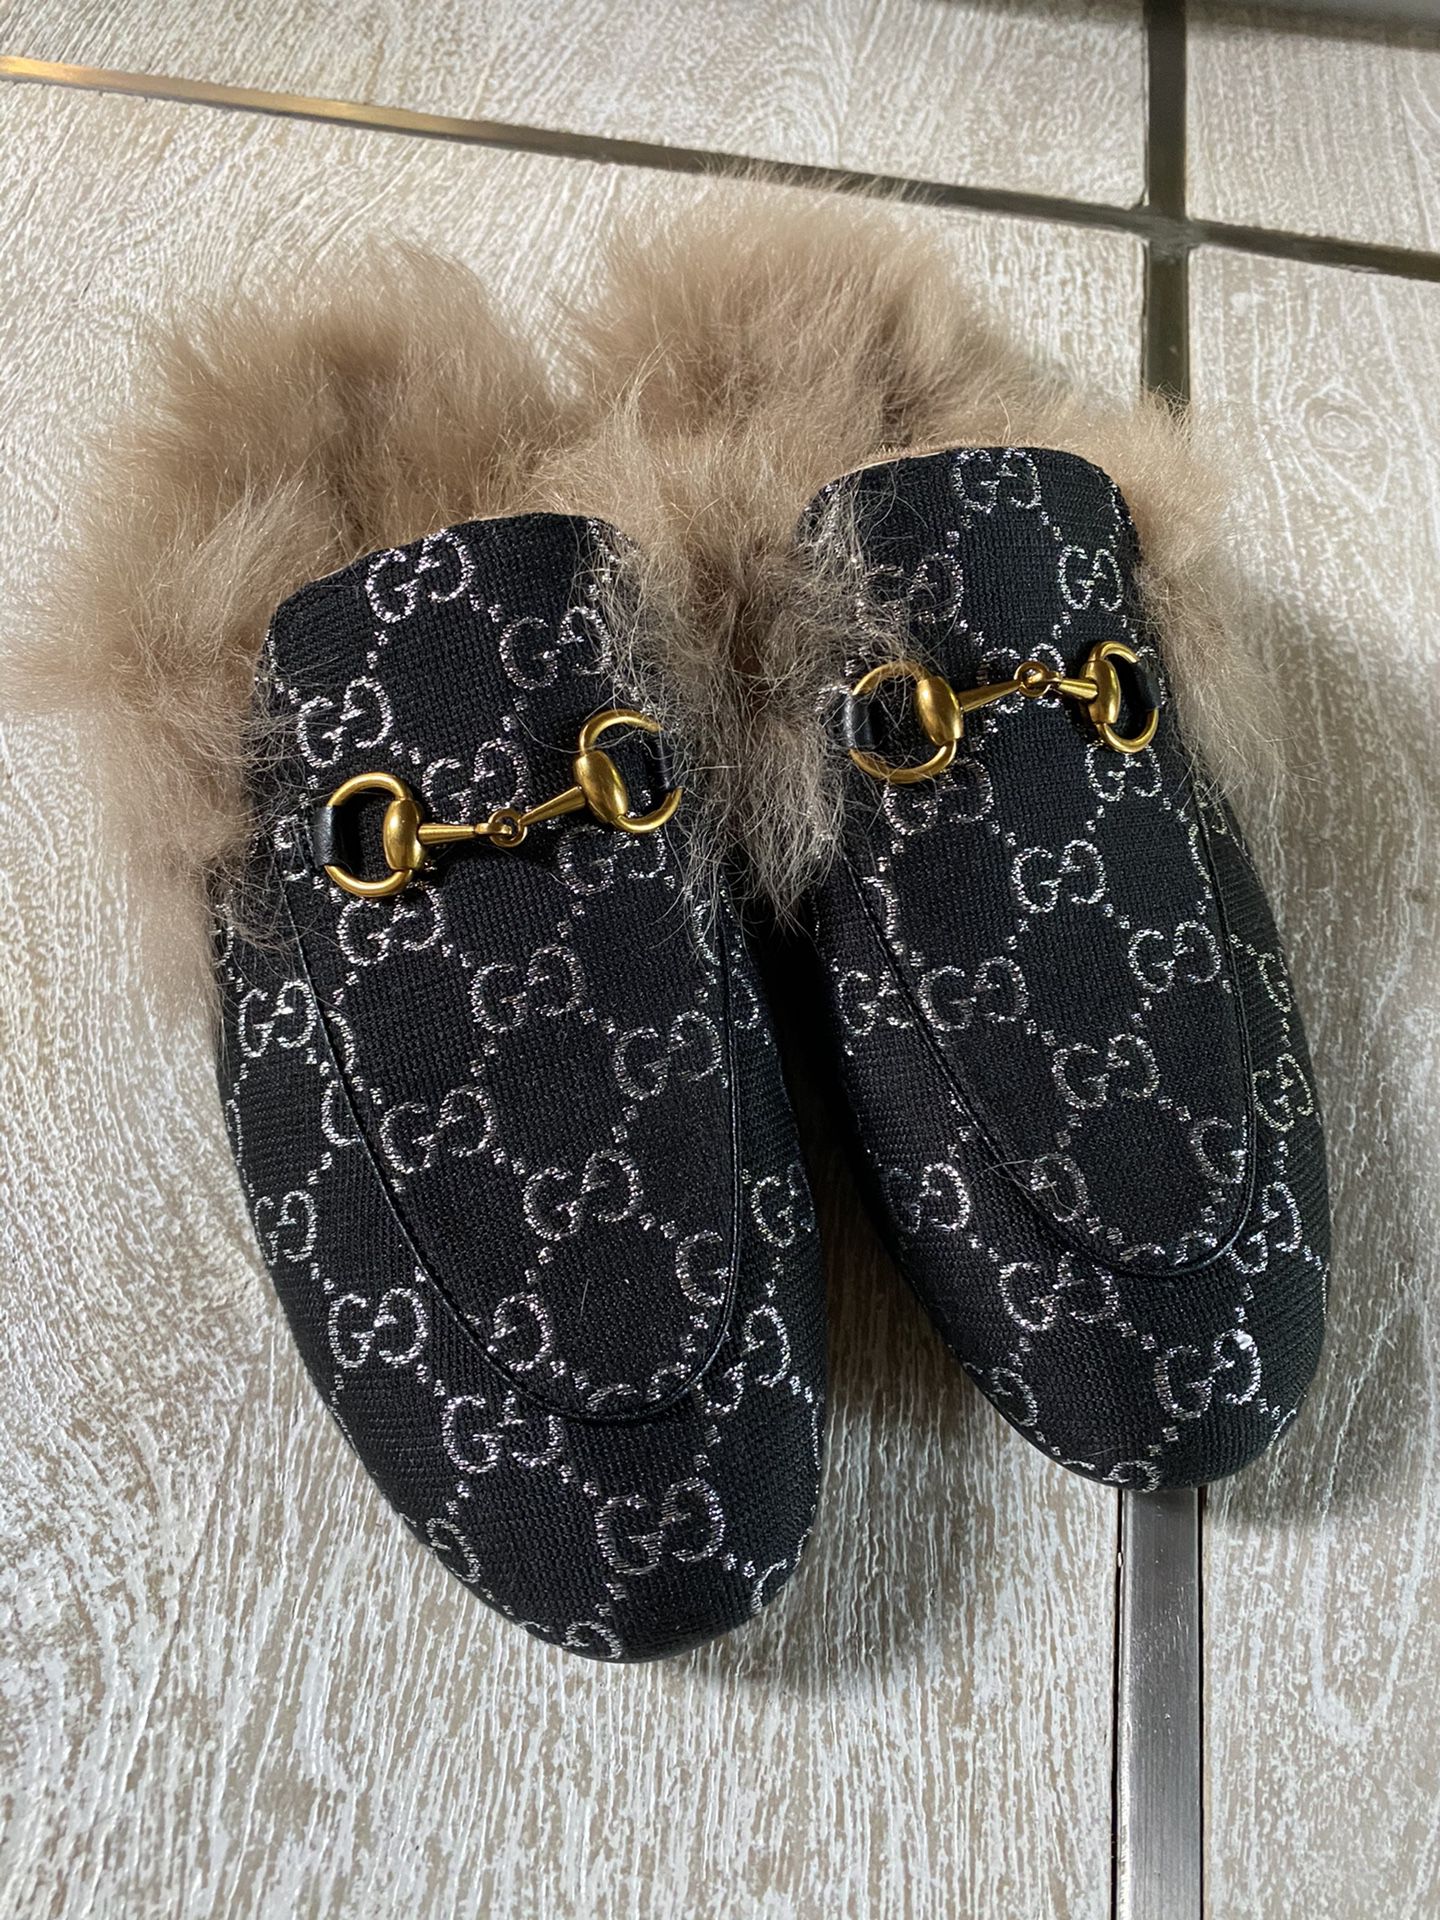 YES! AVAILABLE!!! NEW Women’s GUCCI wool slides, shoes, size 41 US size 9-10 selling due to fit issue